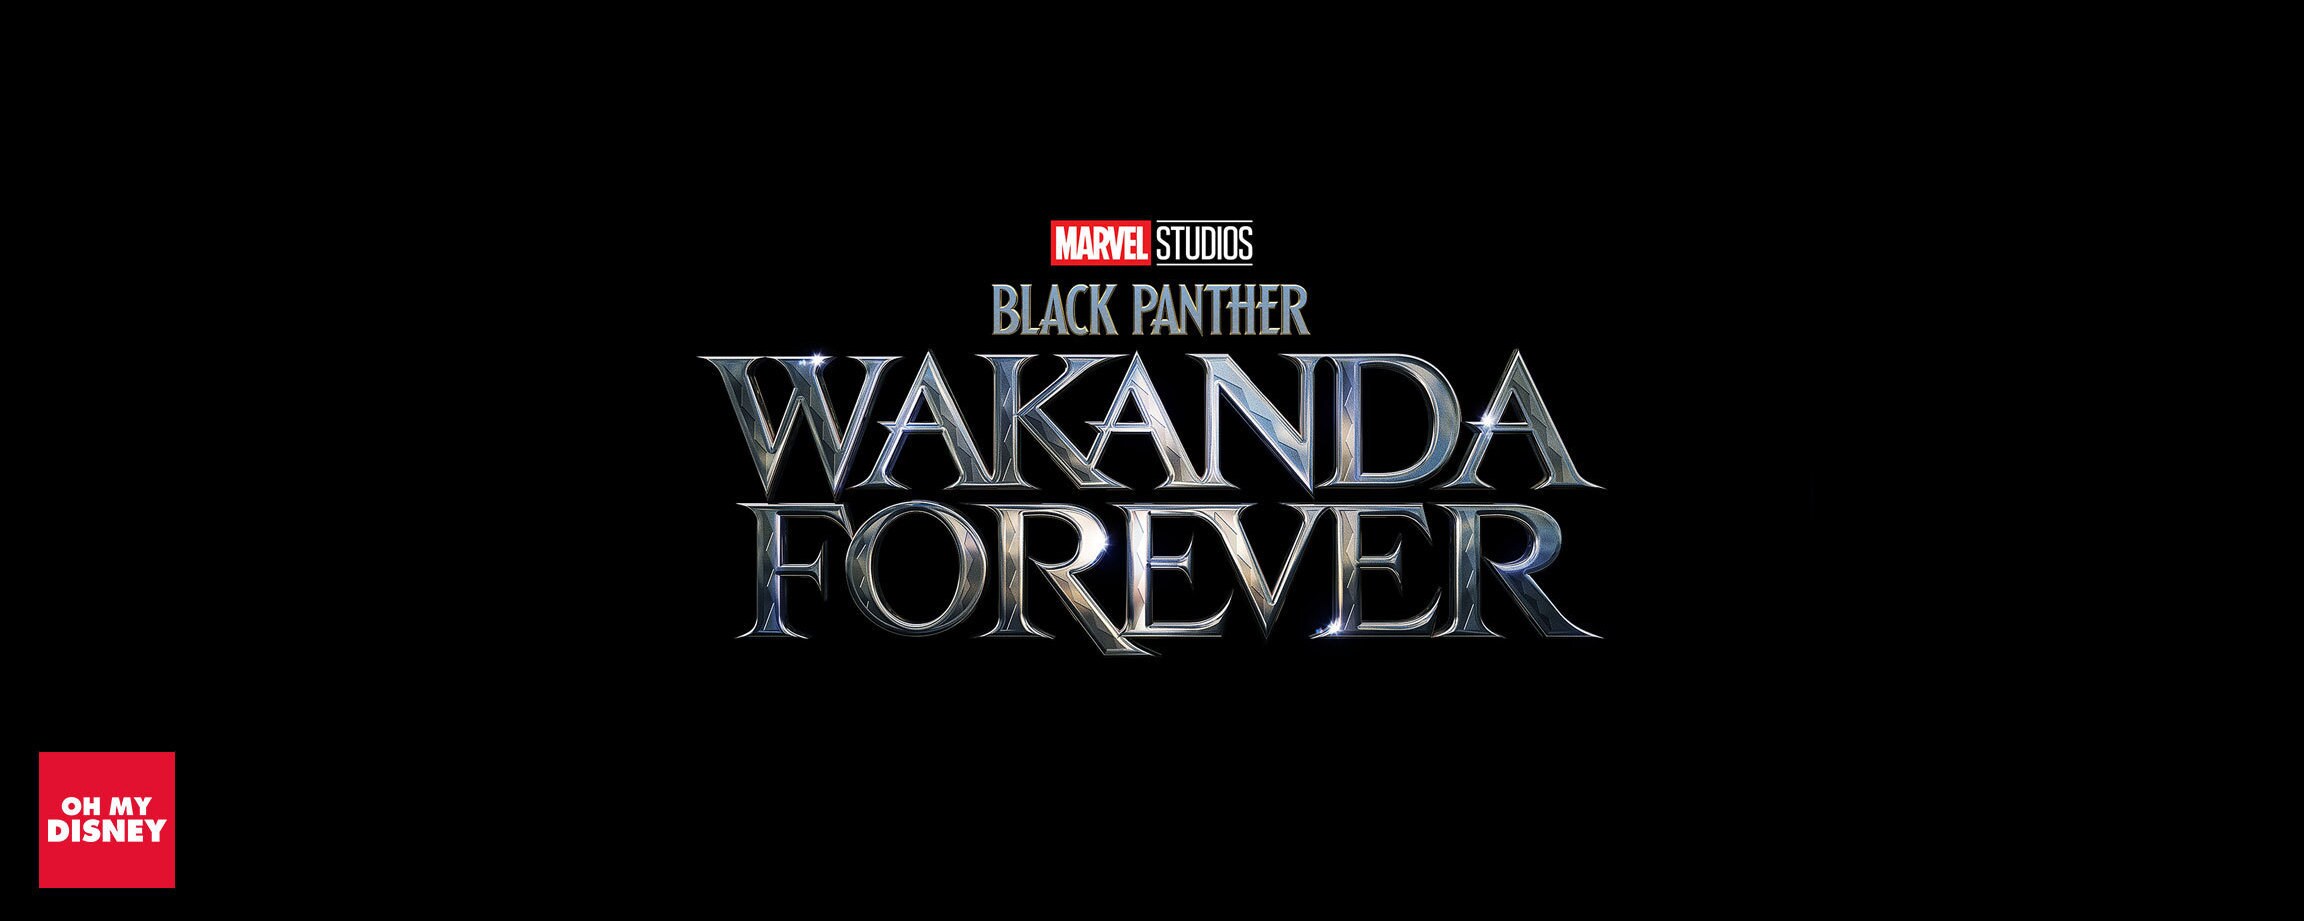 Quiz: Get 100% To Prove That You’re The Ultimate Black Panther: Wakanda Forever Expert